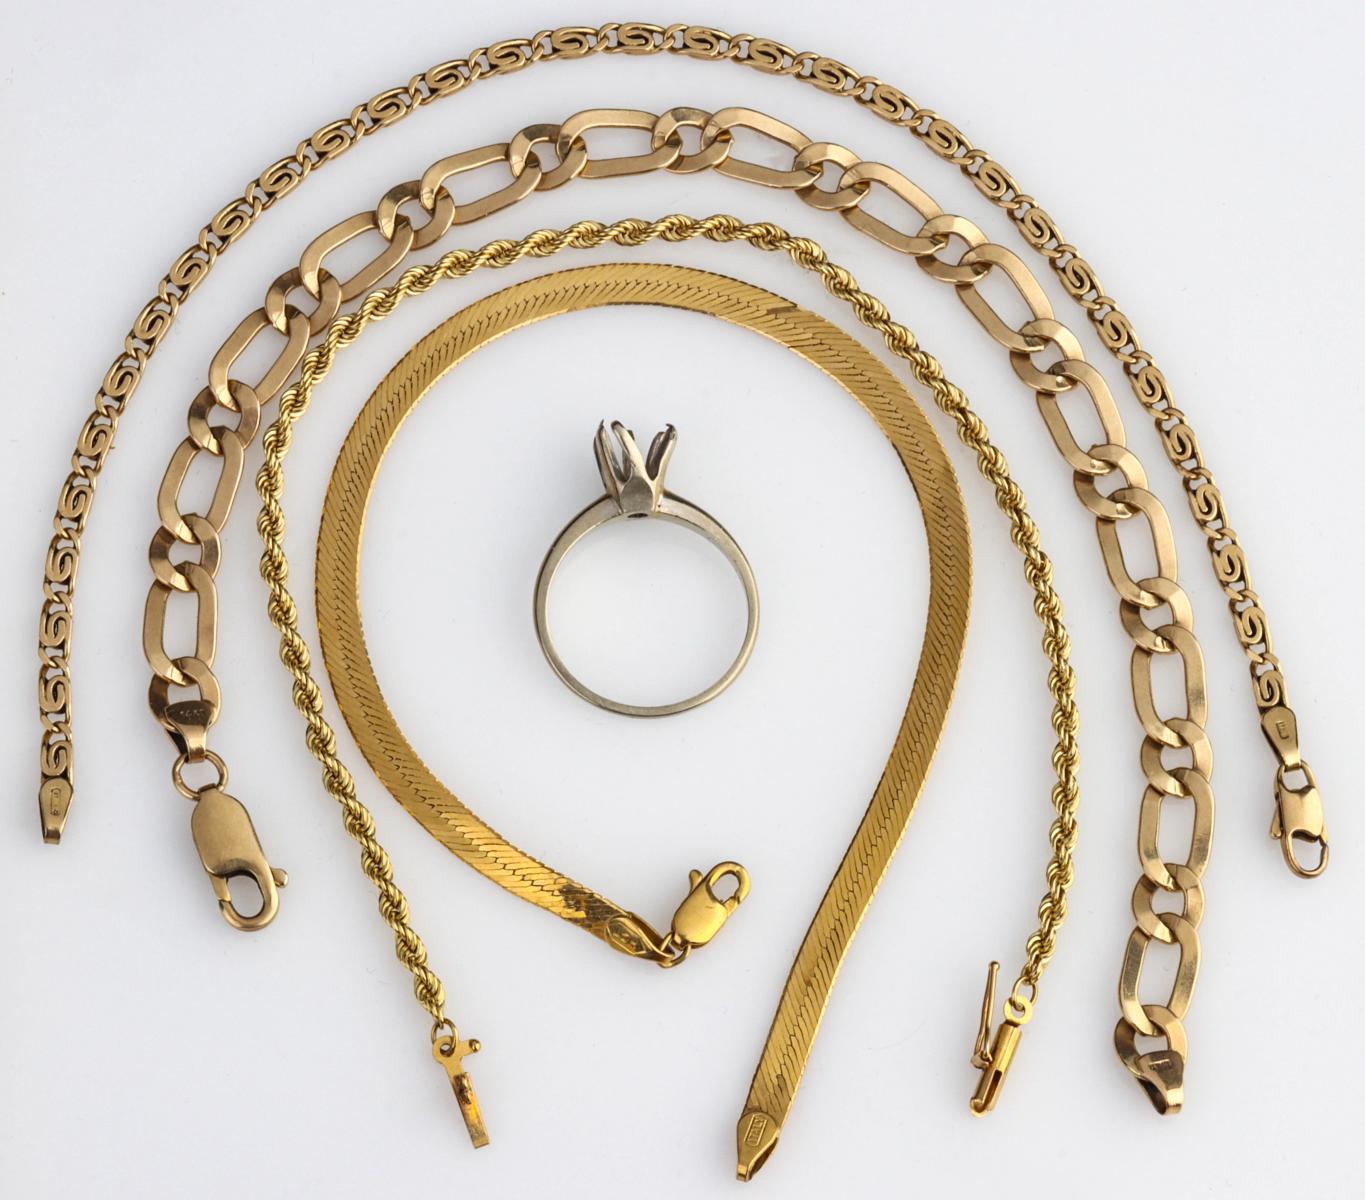 AN ESTATE COLLECTION OF 14K AND 18K GOLD JEWELRY